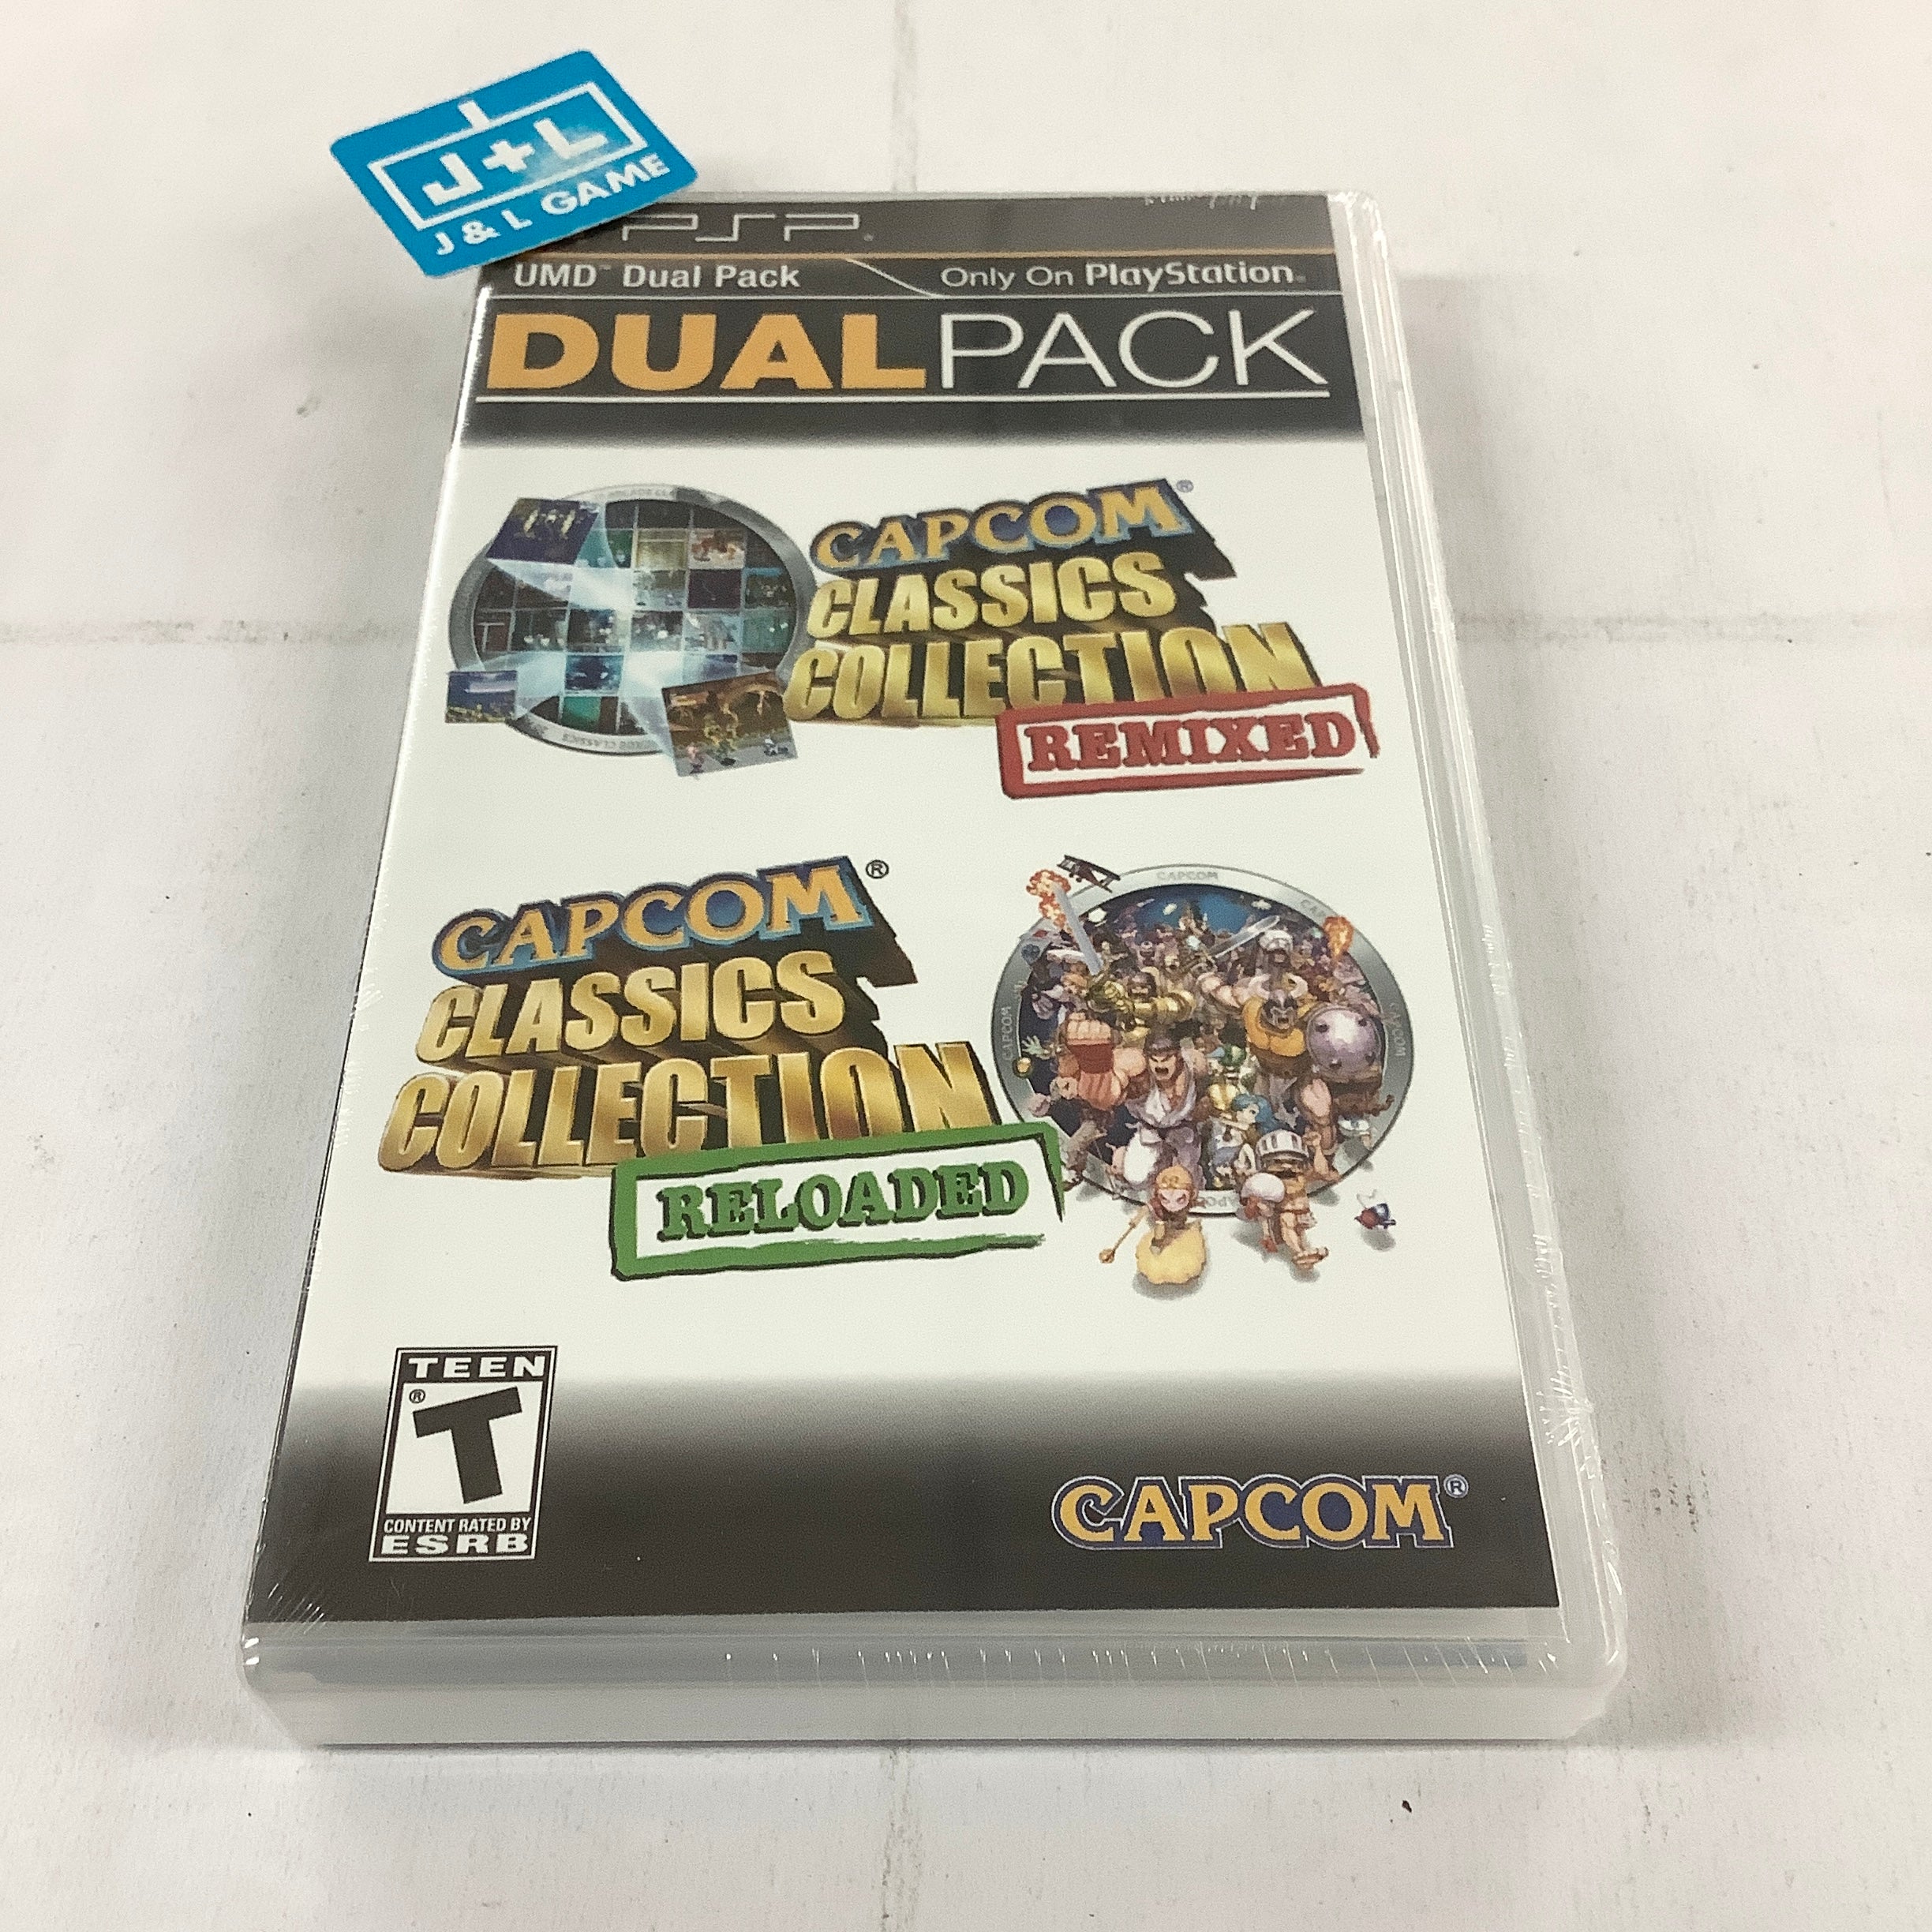 Capcom Classics Dual Pack: Remixed and Reloaded - Sony PSP